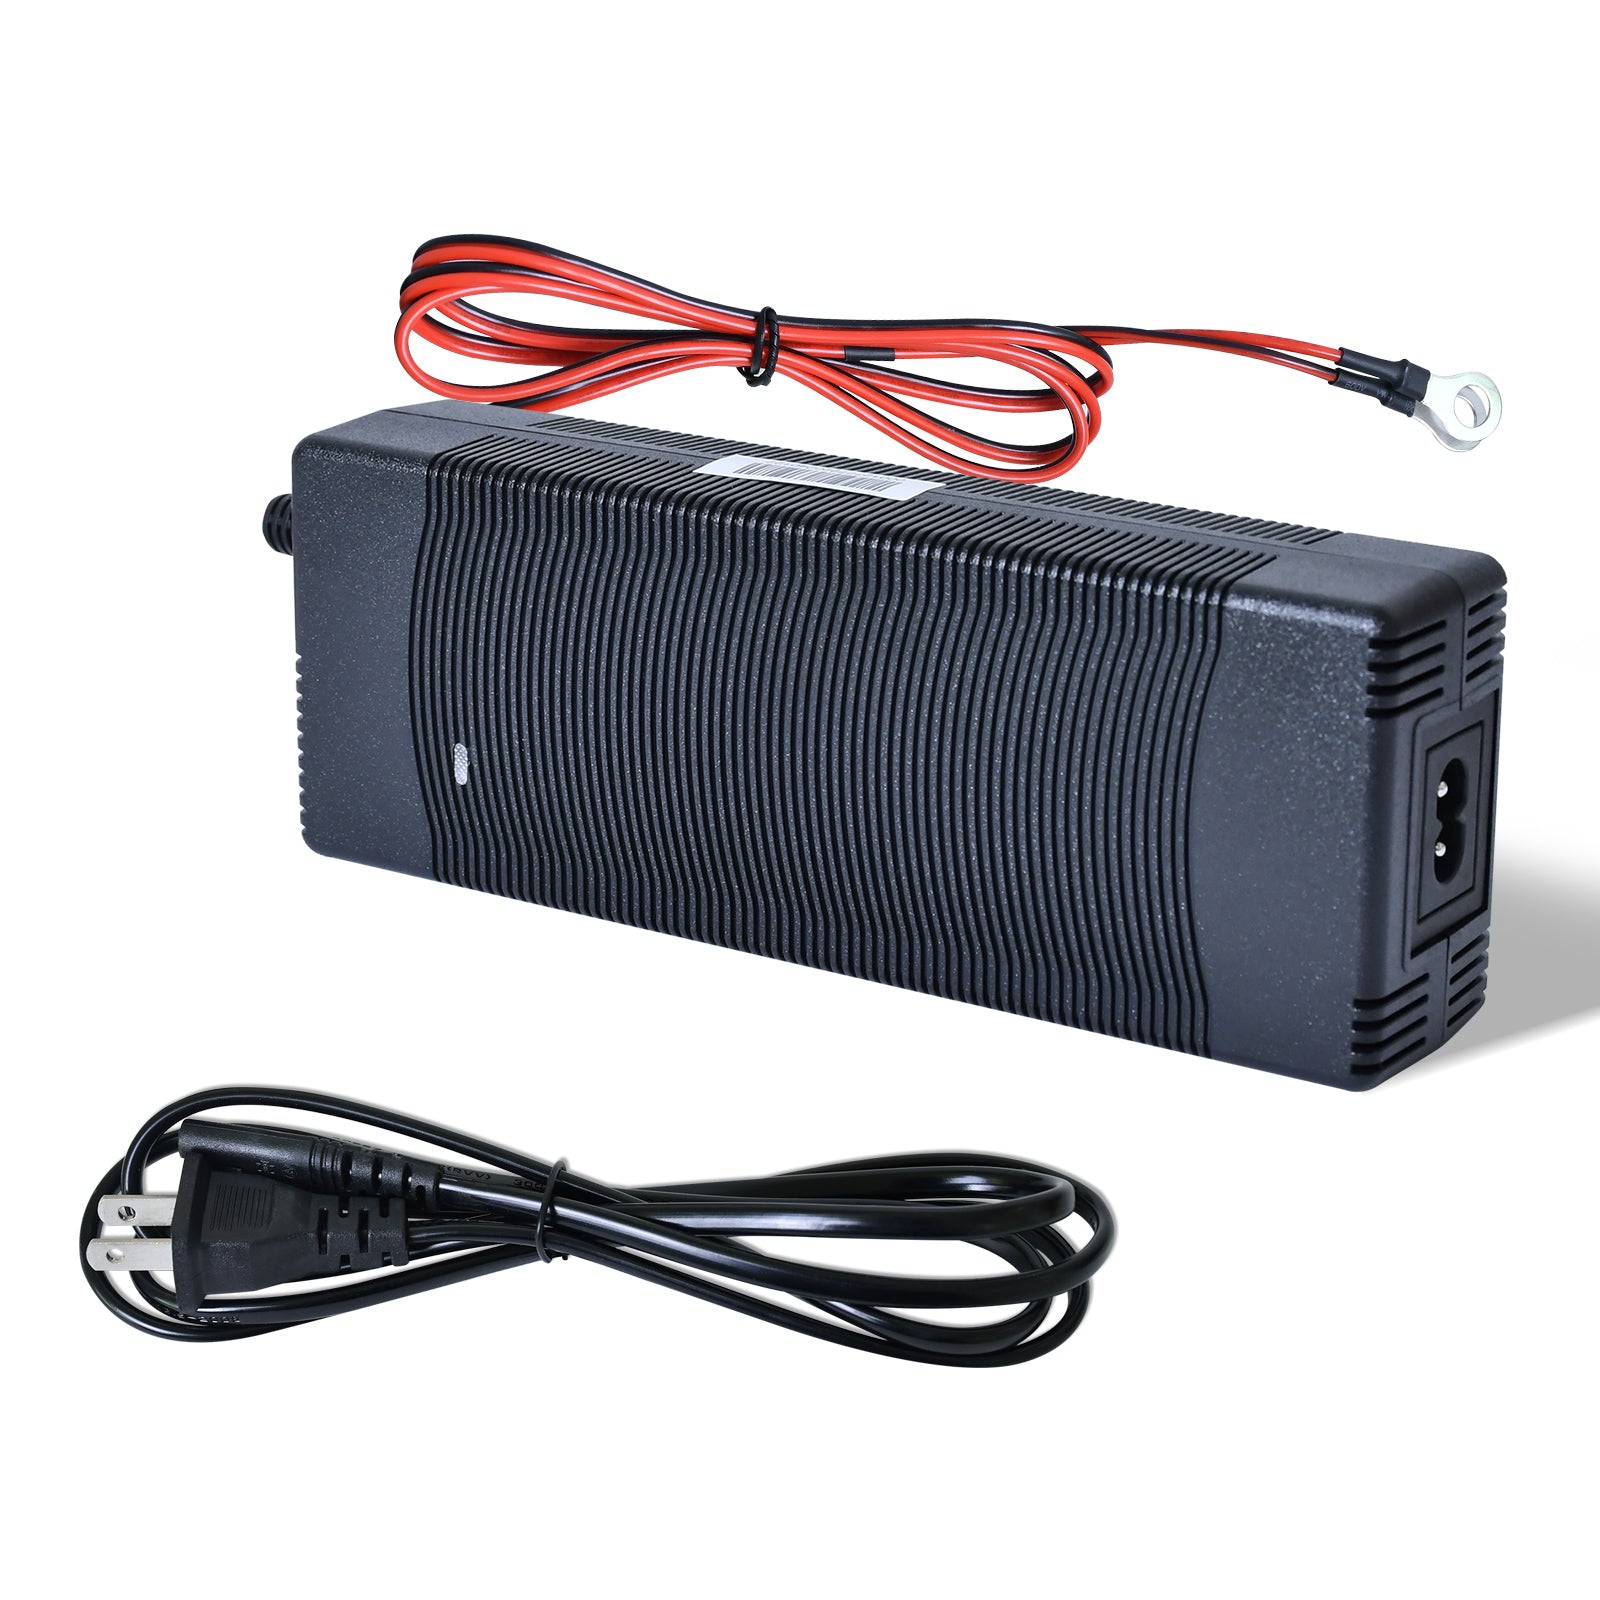 dchouse_12V_10A_LiFePO4_portable_battery_charger_1